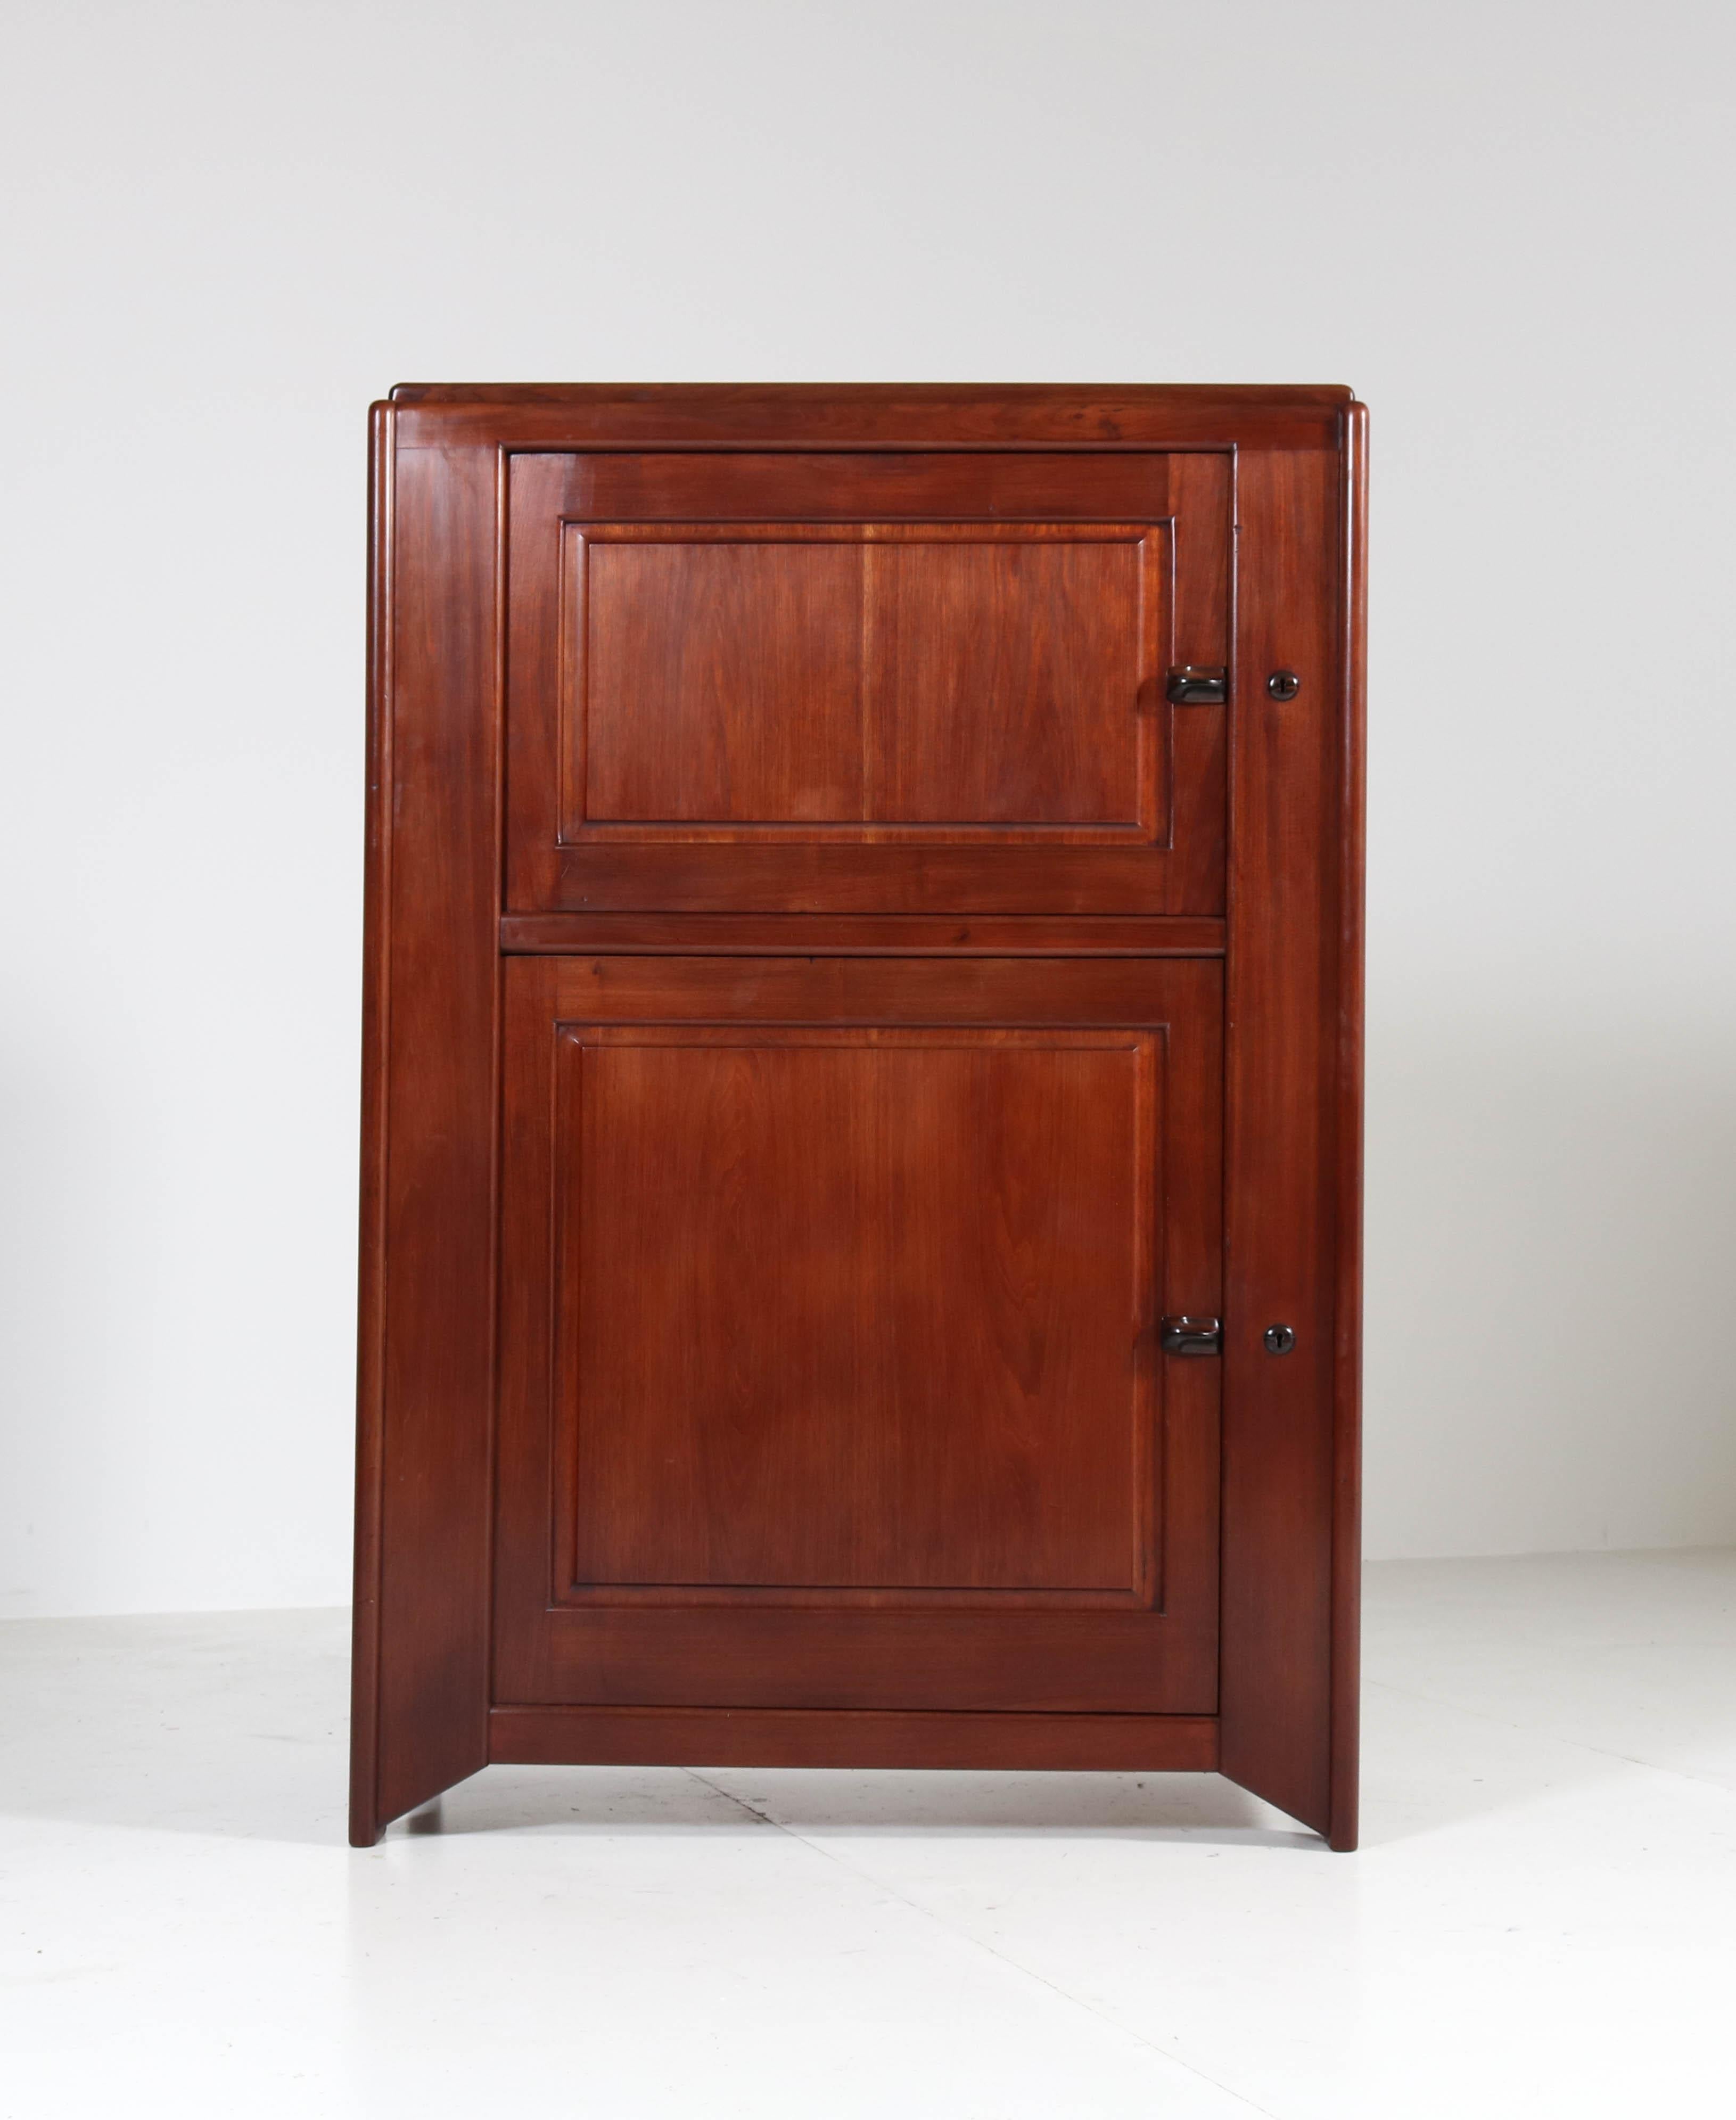 Magnificent and very rare Art Deco Amsterdam School bookcase.
Design by Jac. van den Bosch for 't Binnenhuis, Amsterdam.
Striking Dutch design from the 1920s
Solid mahogany with solid ebony Macassar handles.
Opus number: 2259
This bookcase was